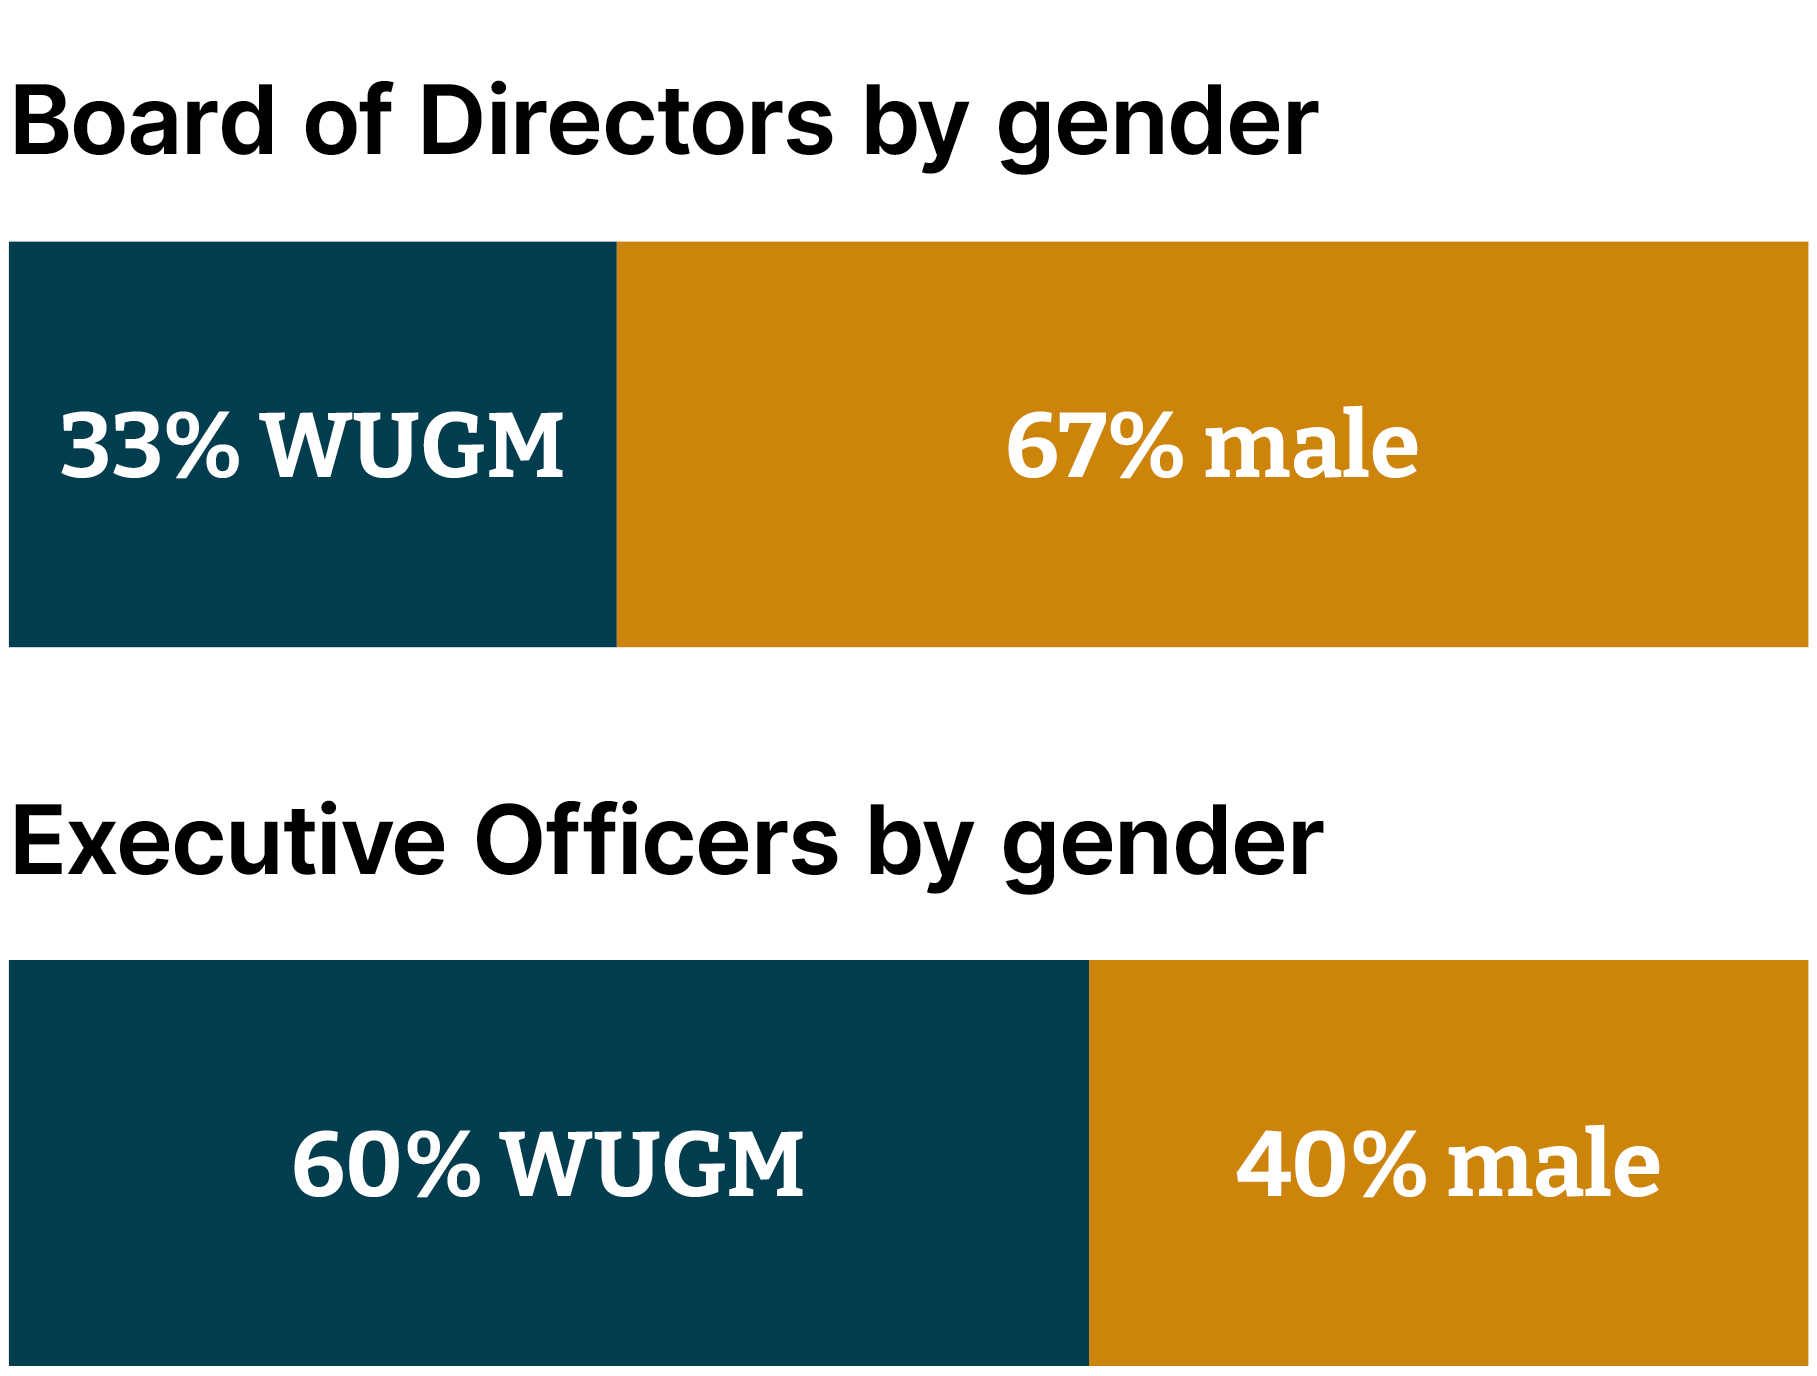 Bar graphs showing our leadership diversity: Board of directors 33% WUGM and 67% male; Executive officers 60% WUGM and 40% male